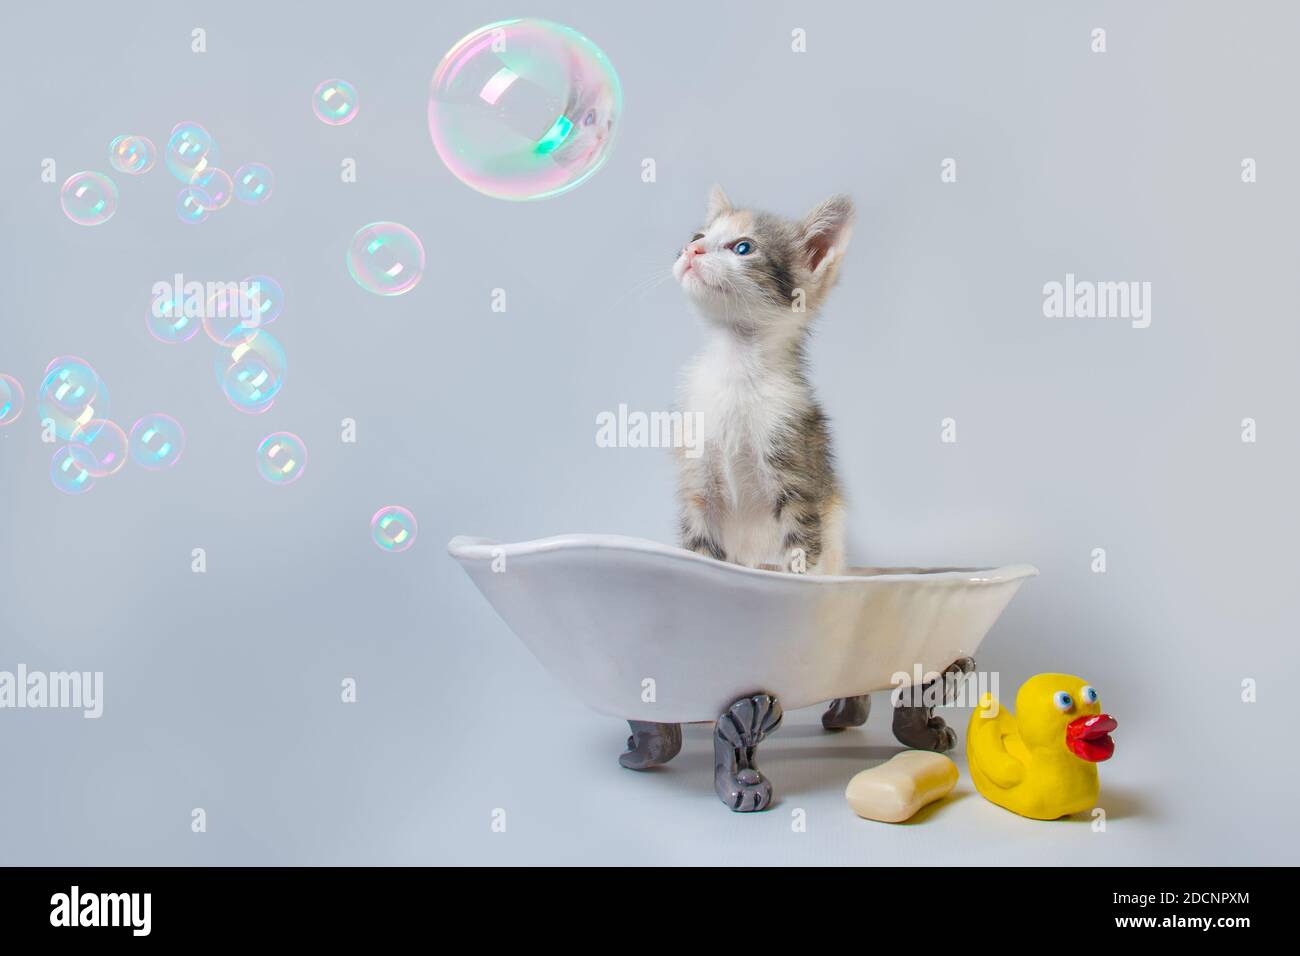 grooming tabby kitten looks at soap bubbles in a toy bathtub next to a bar of soap and a yellow rubber duckie Stock Photo